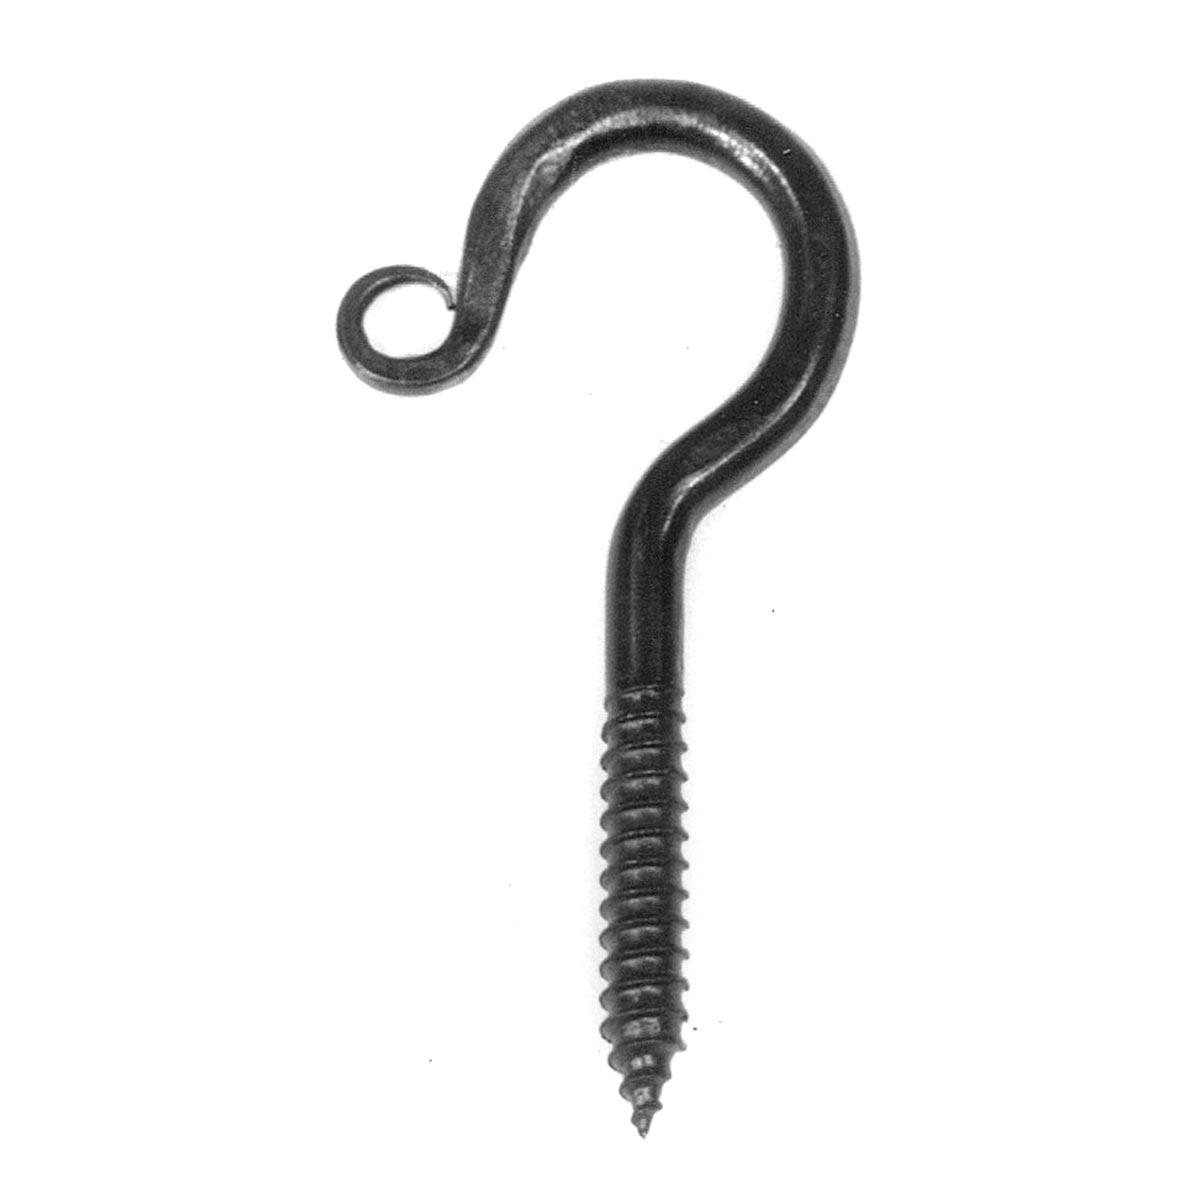 Screw Hook, large  Wrought Iron Home AccessoriesWrought Iron Home